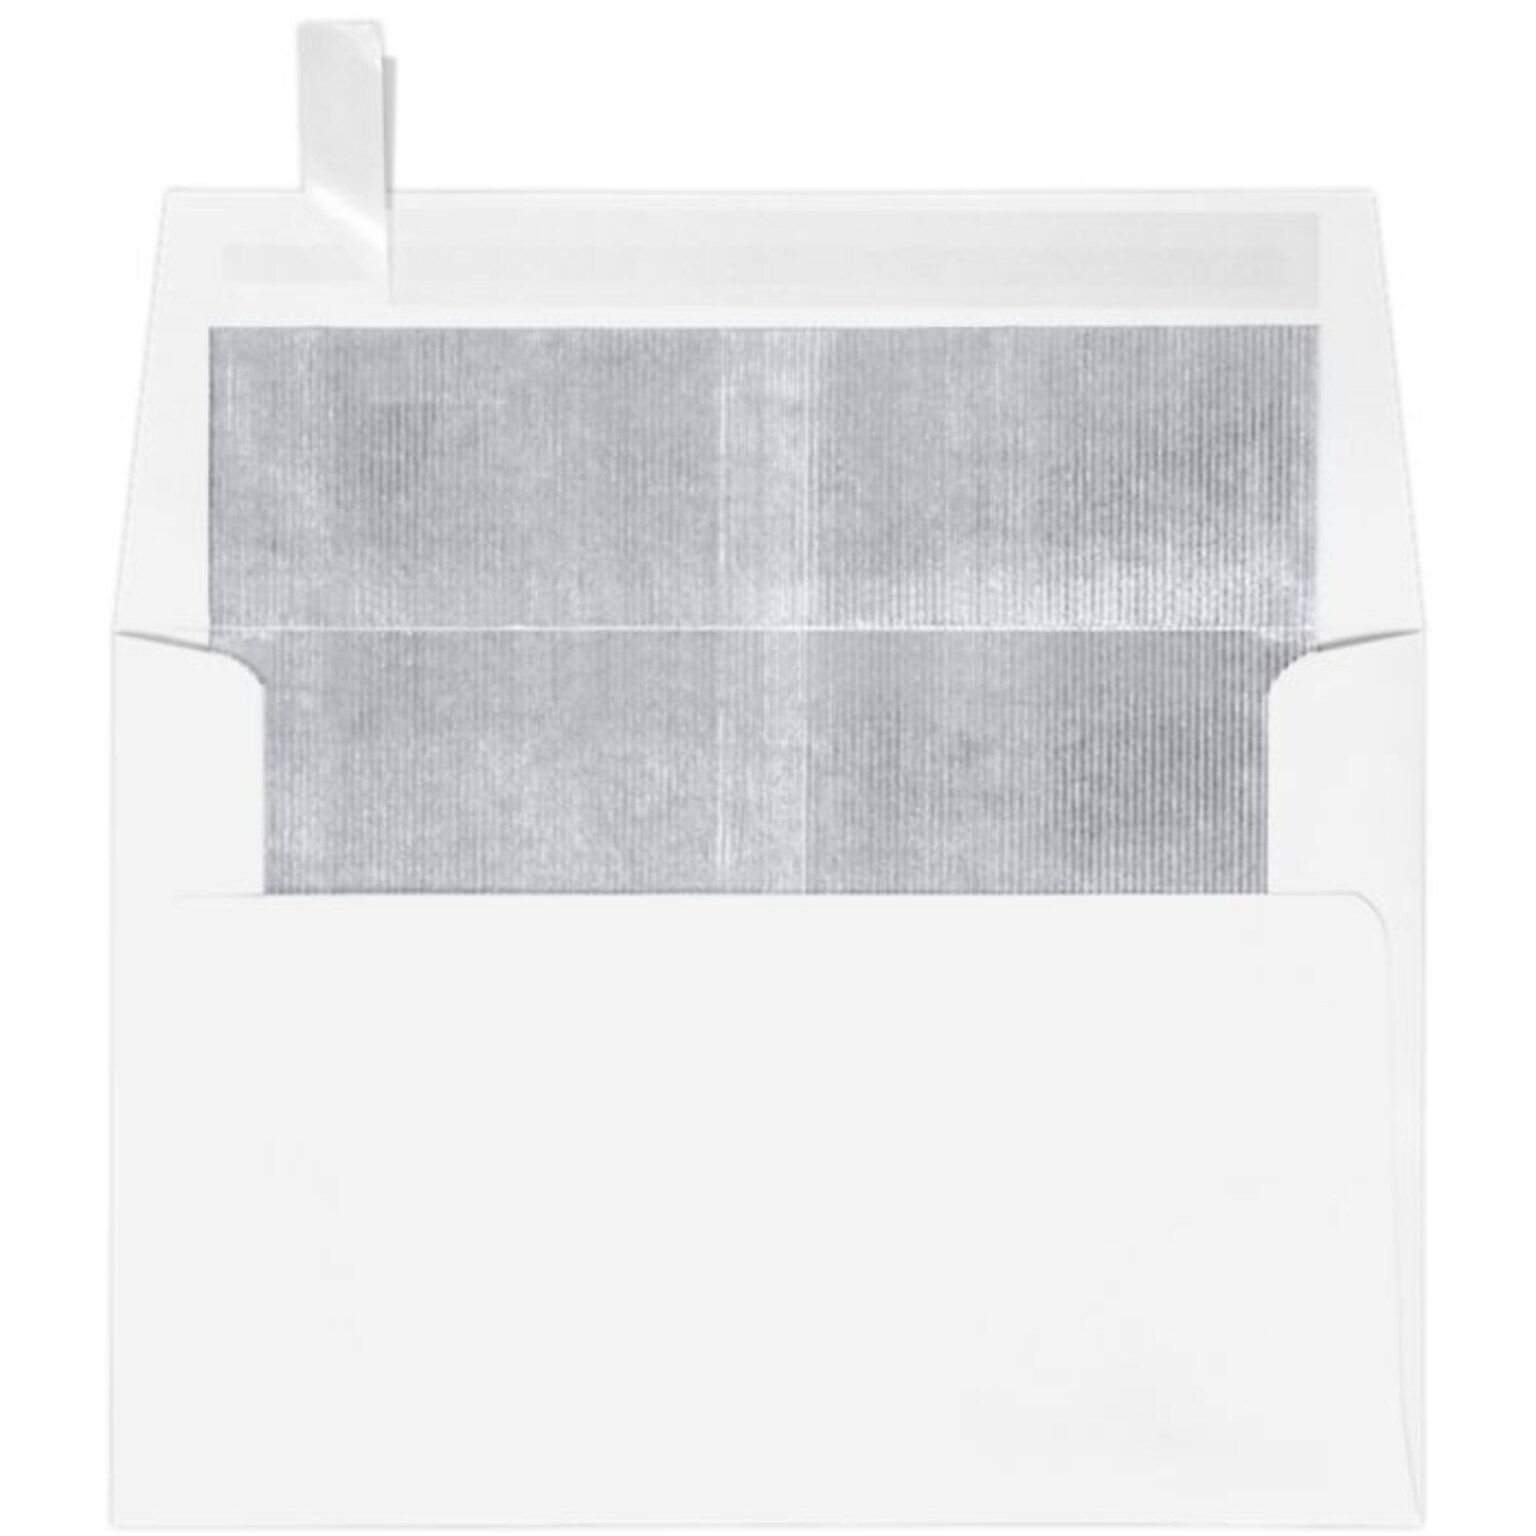 LUX A4 Foil Lined Invitation Envelopes (4 1/4 x 6 1/4) 50/Box, White w/Silver LUX Lining (FLWH4872-03-50)